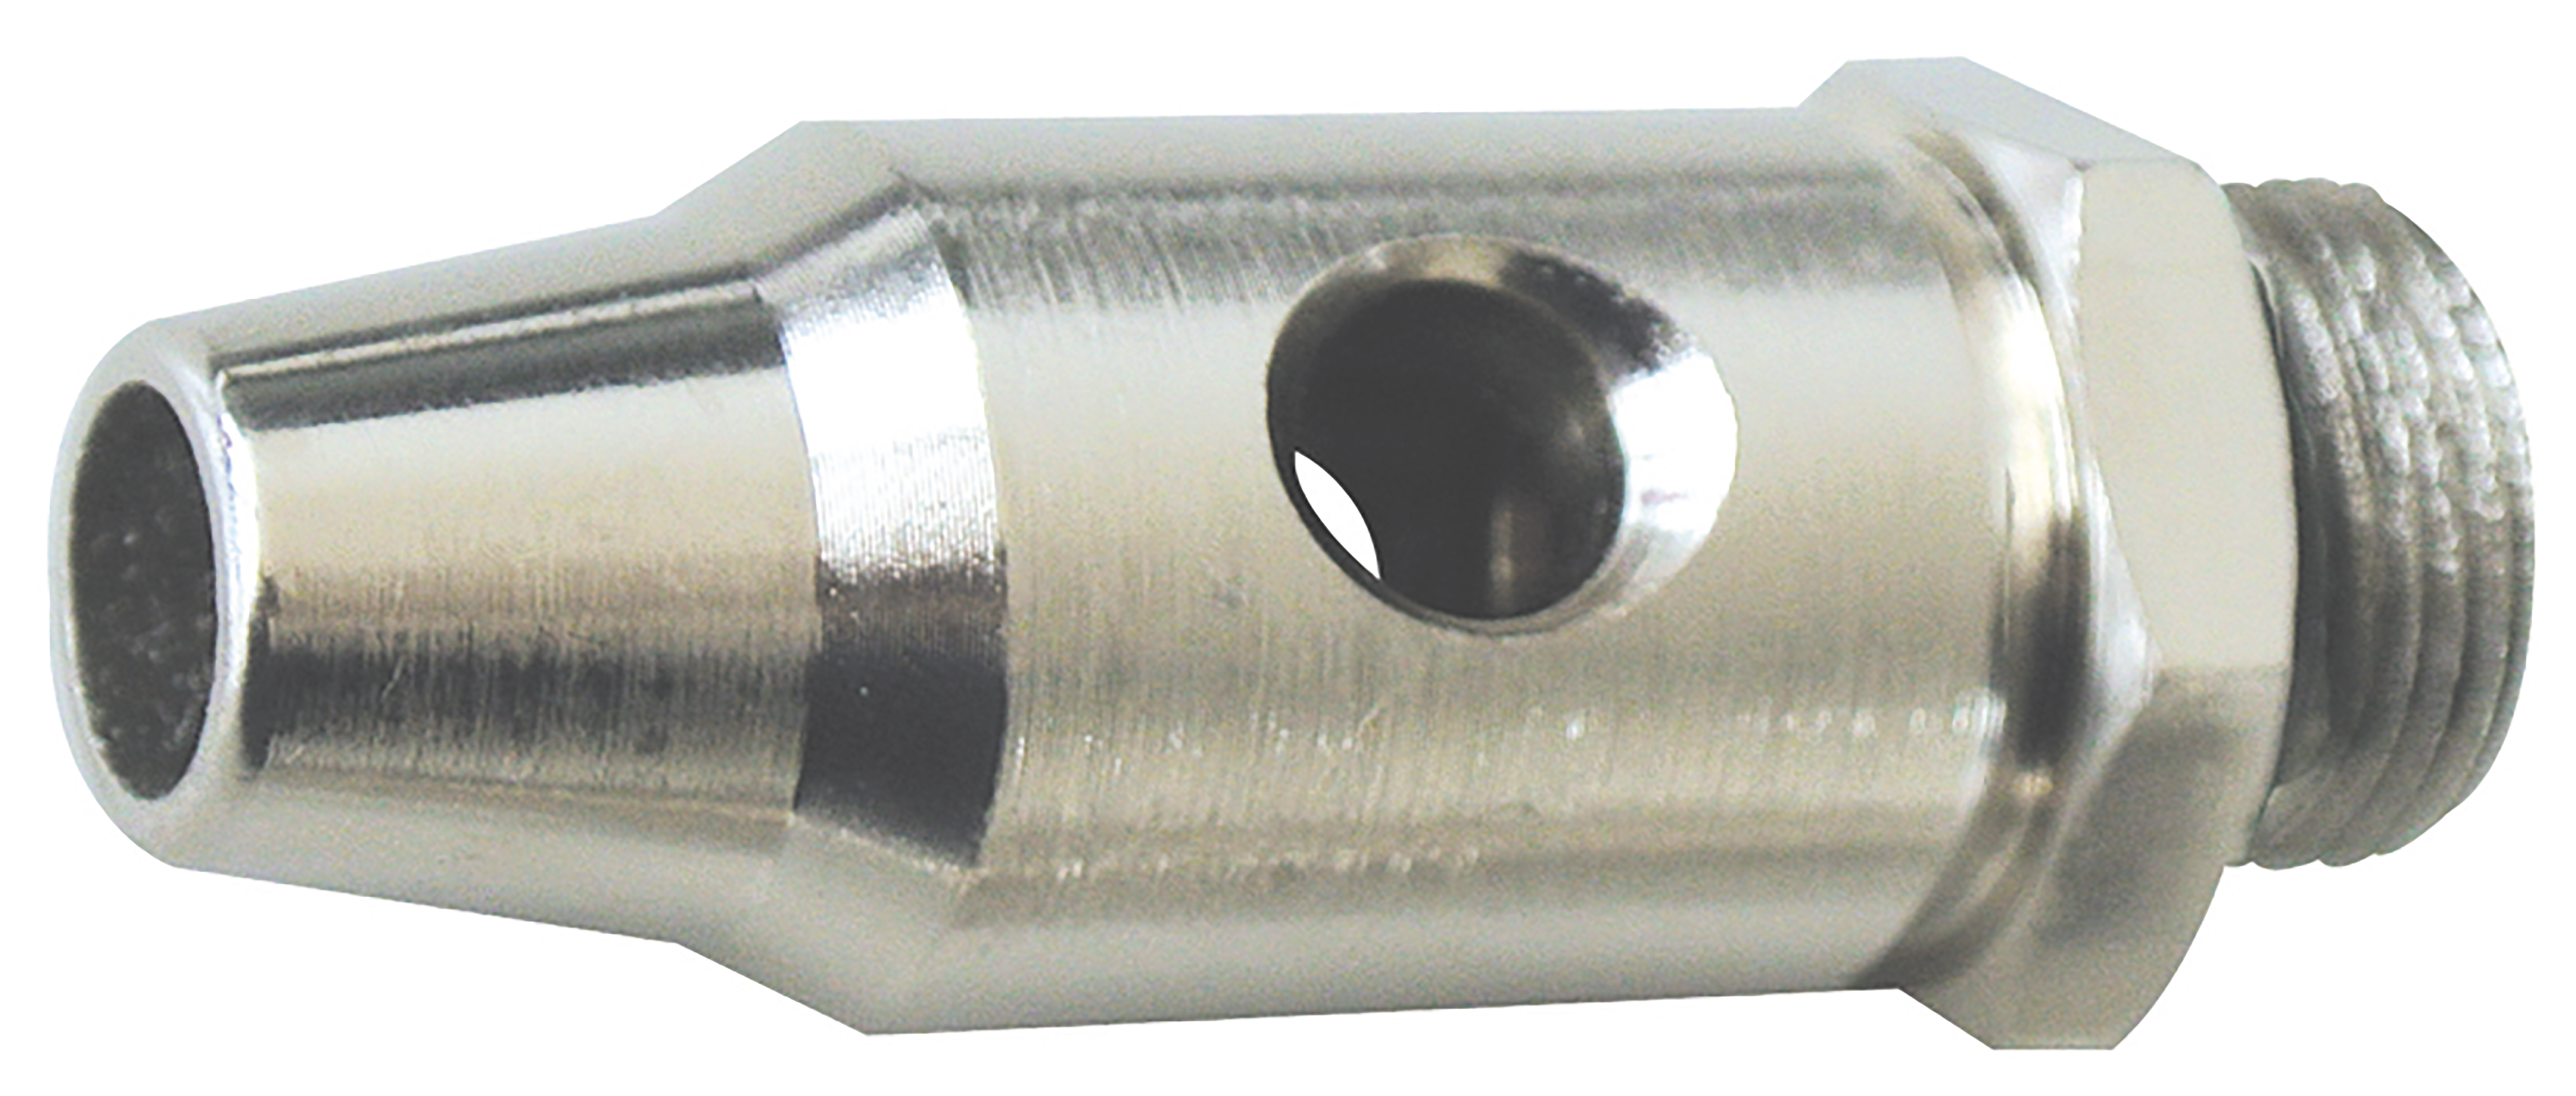 High flow safety nozzle, hole-Ø6,9 mm, M12 × 1.25, 900–1,000 l/min, < 85 dB(A) at 87 psi/6 bar, steel, nickel-plated